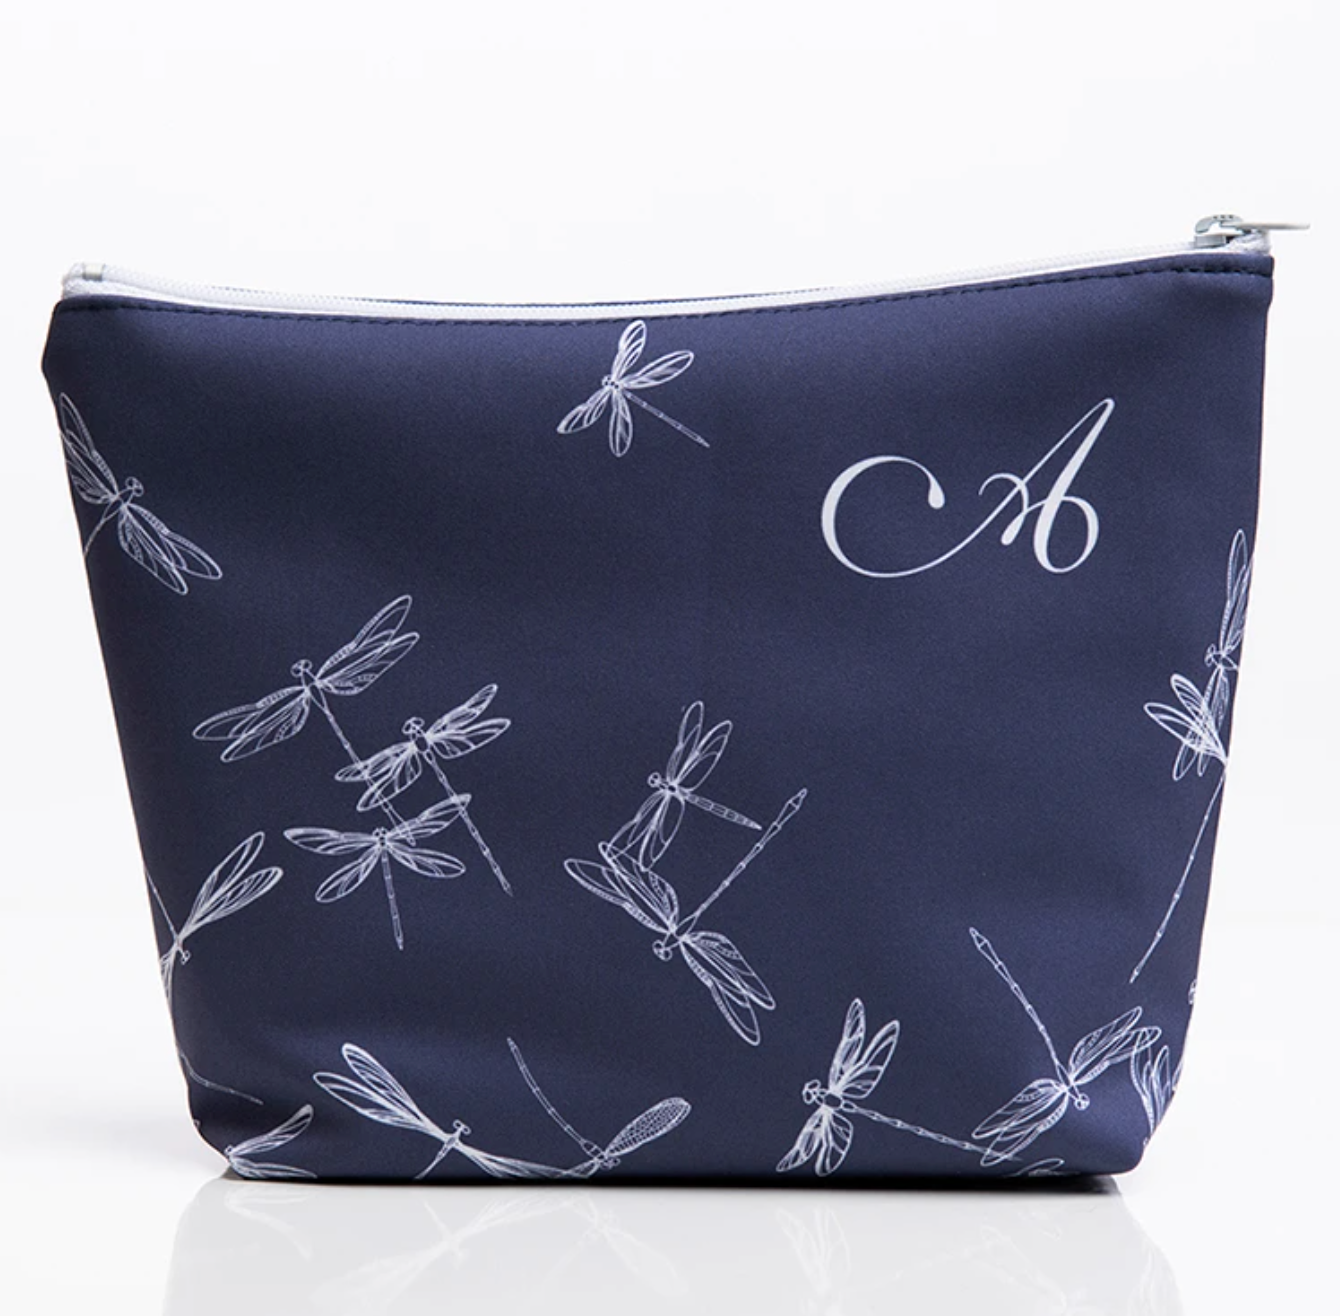 Make-up Bag in Dragonfly Print - 901DF